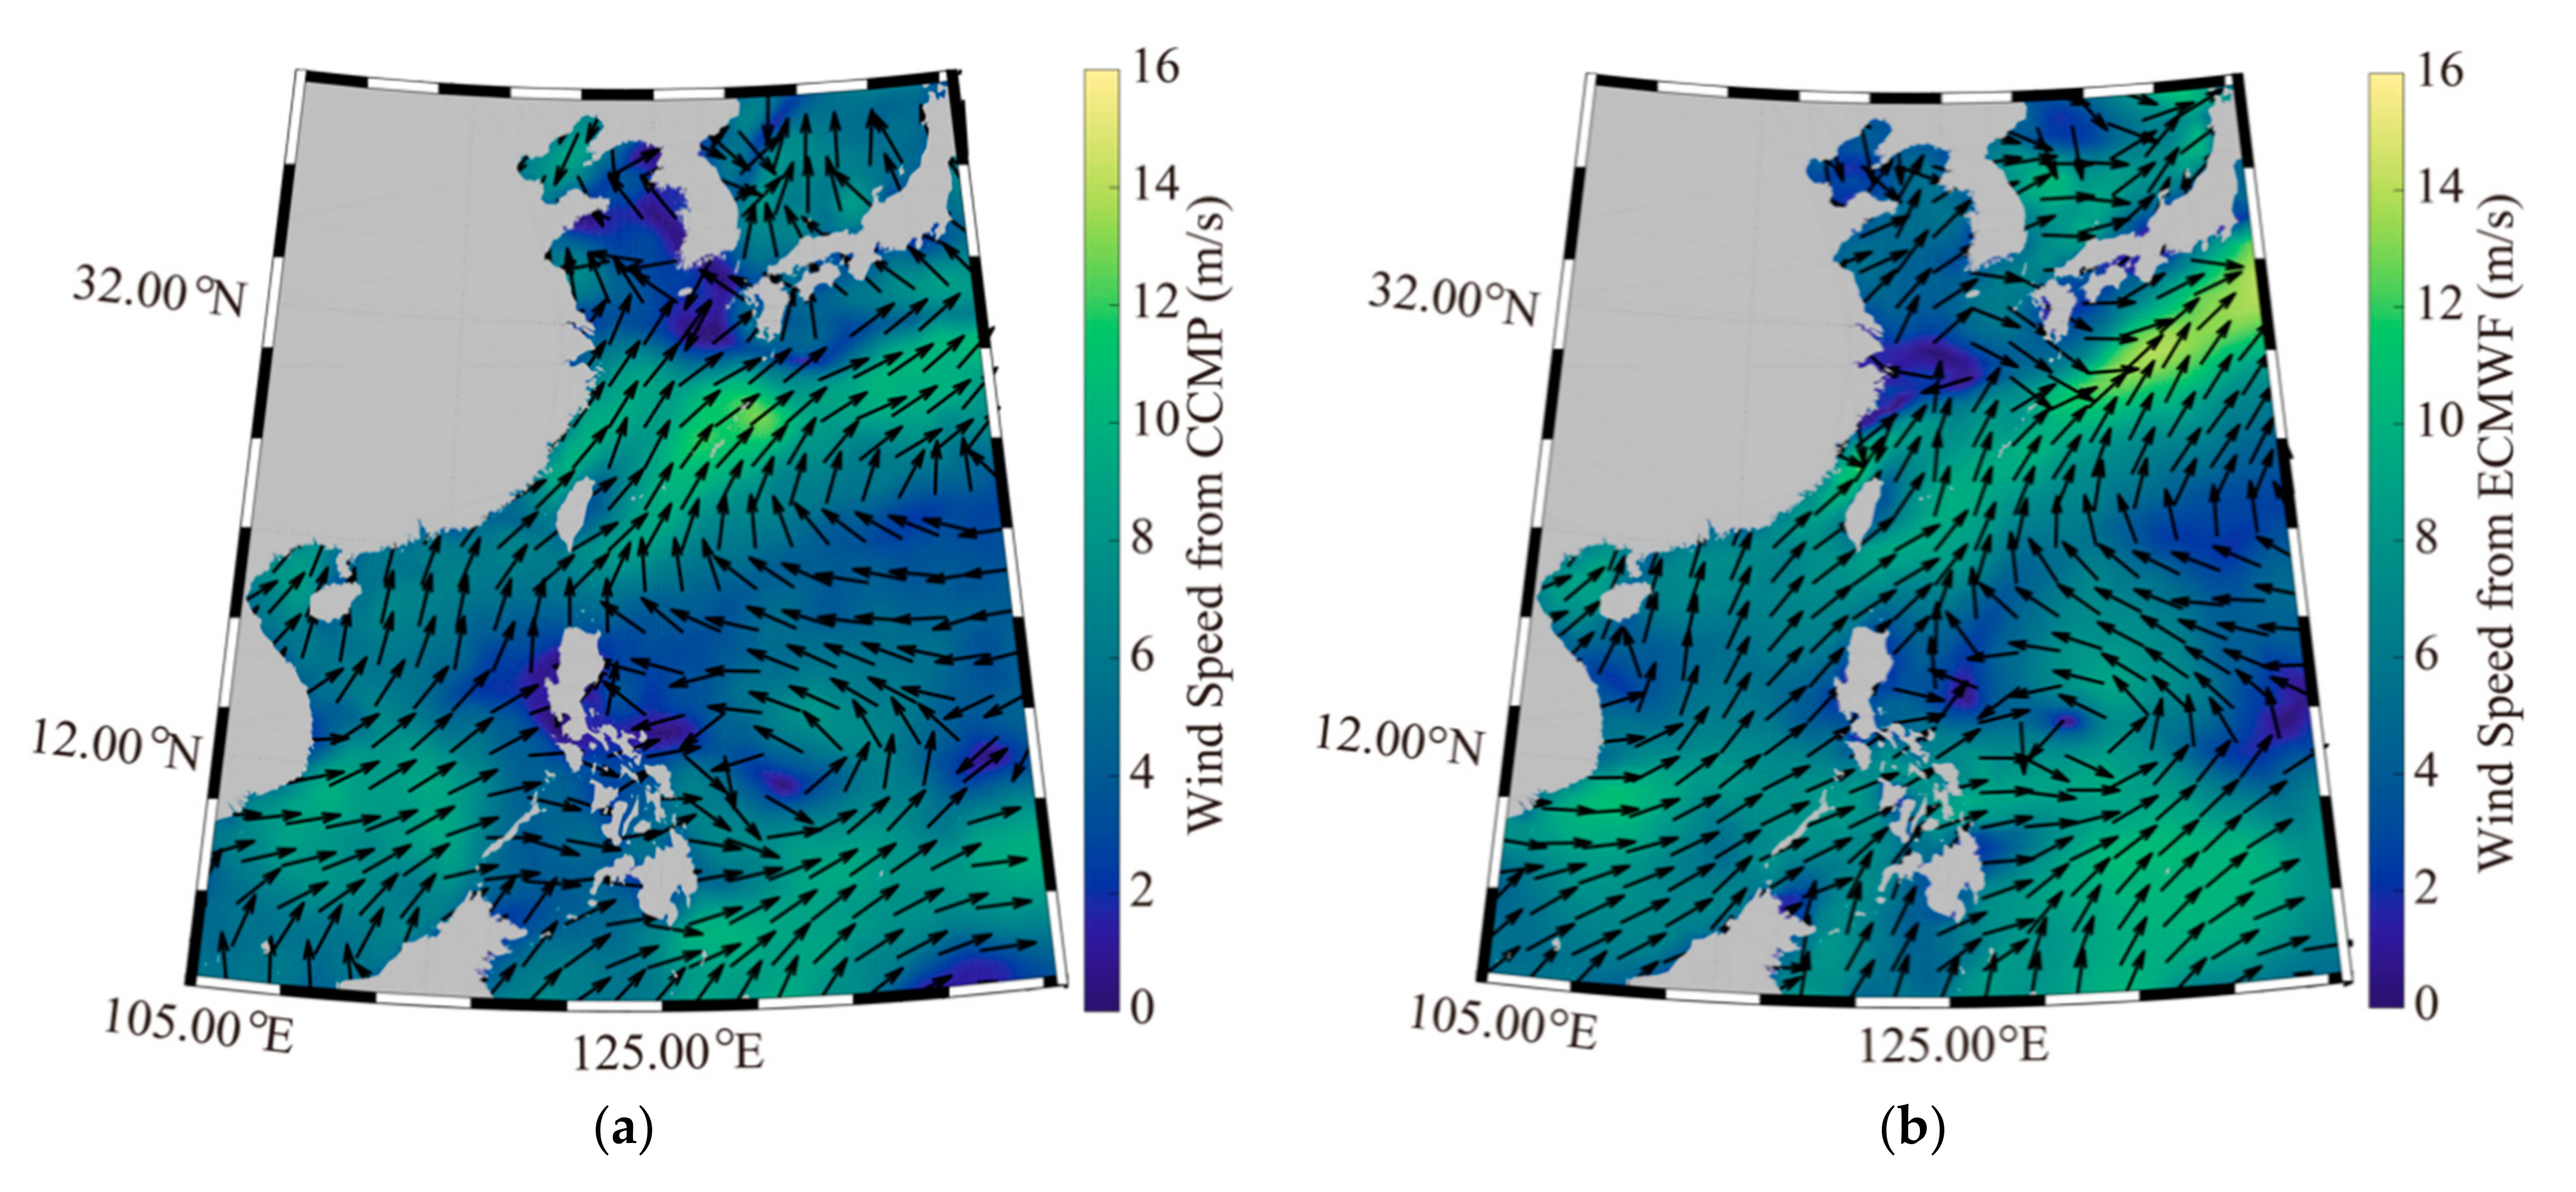 in Ocean Stokes Temperature Full-Text on Transport JMSE of | | Pacific Free Wave-Induced the Surface Analysis Western Simulations Effects Sea